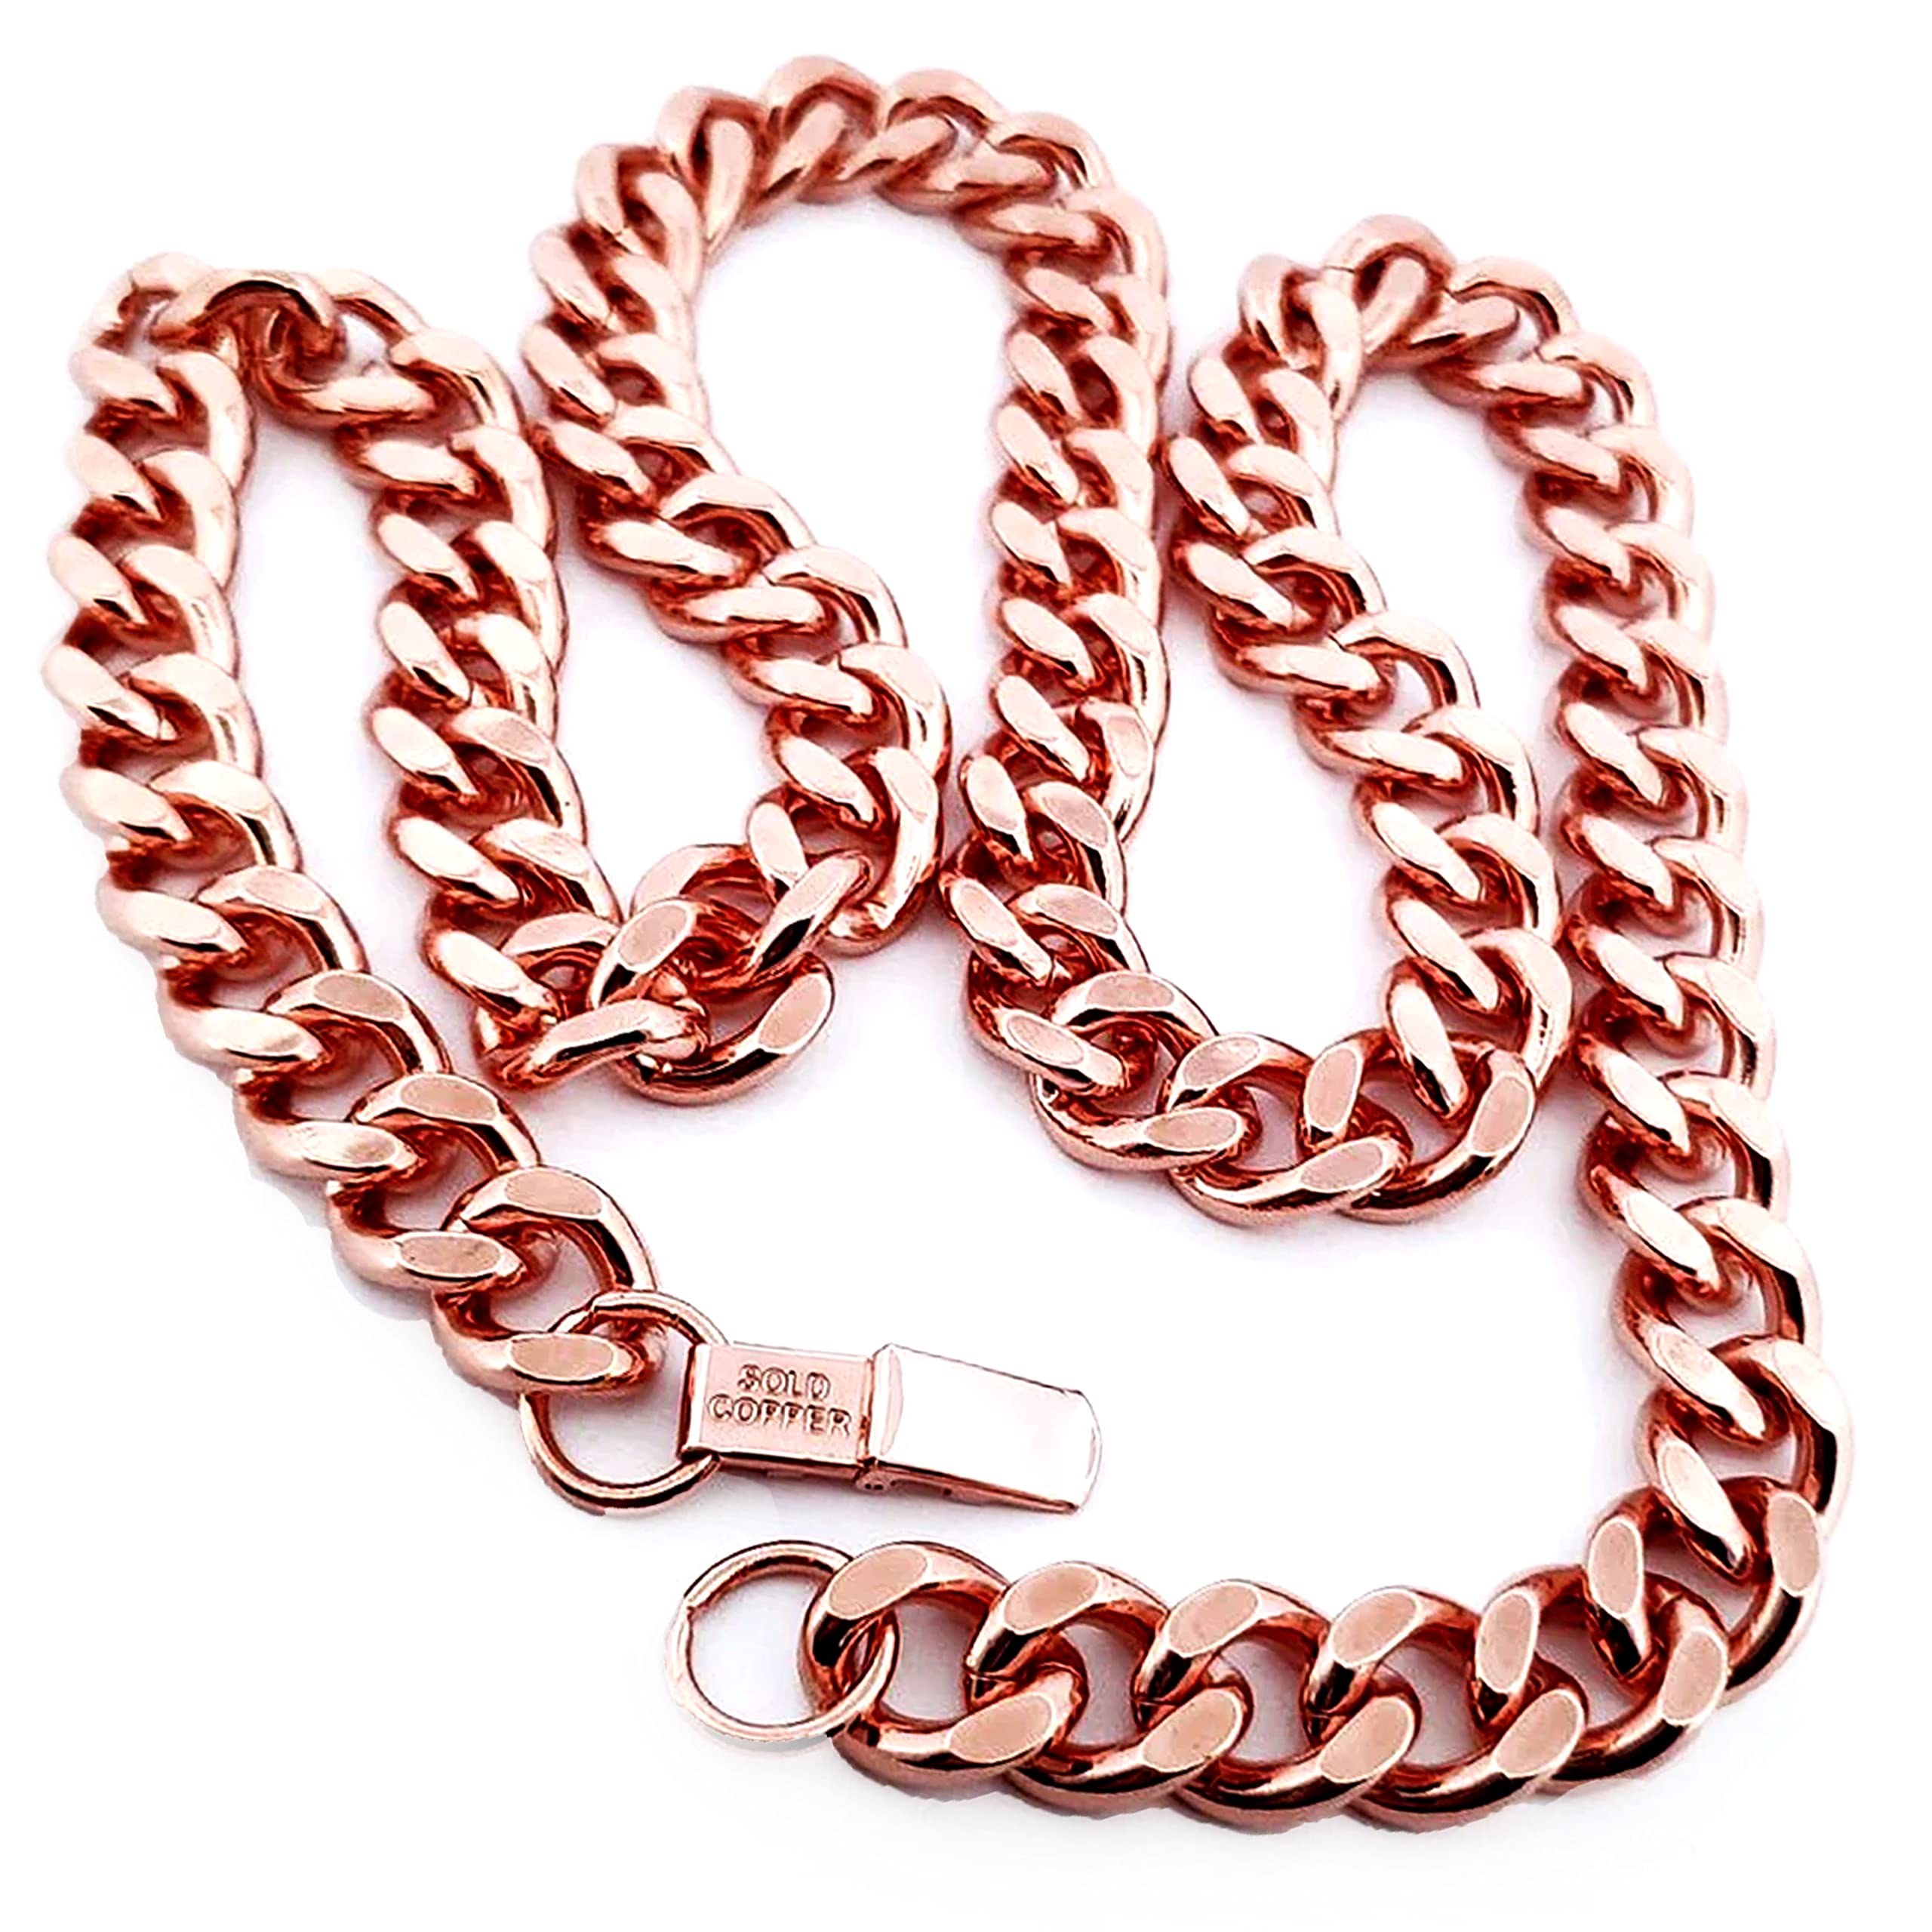 1 Pure Copper Cuban Link Necklace Heavy Solid Statement Jewelry Chain 24